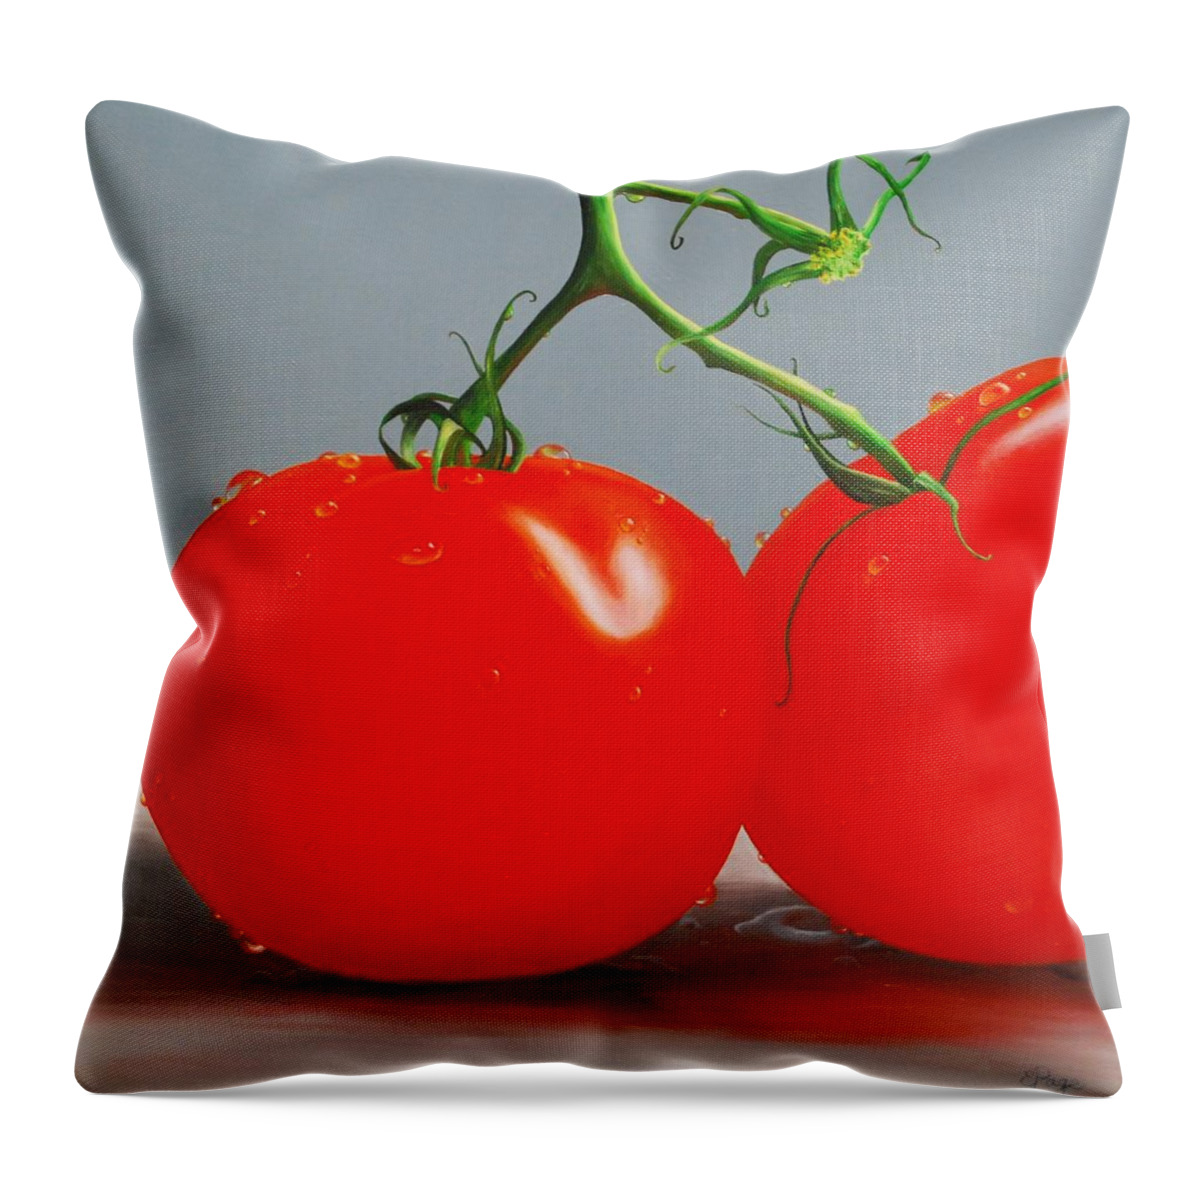 Realism Throw Pillow featuring the painting Tomatoes with Stems by Emily Page